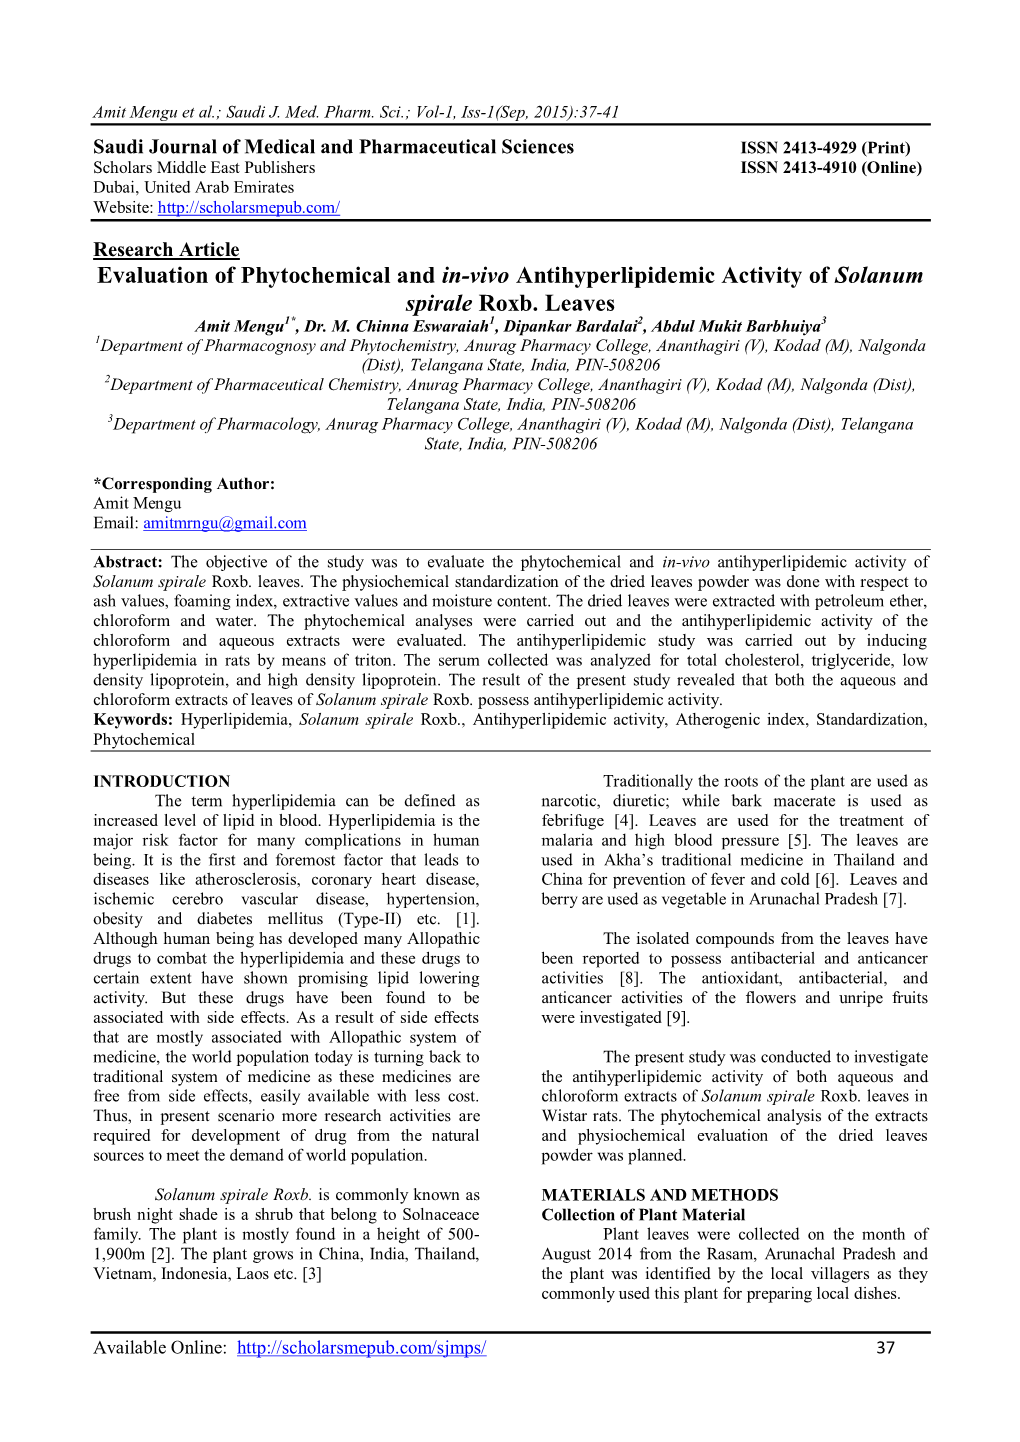 Evaluation of Phytochemical and In-Vivo Antihyperlipidemic Activity of Solanum Spirale Roxb